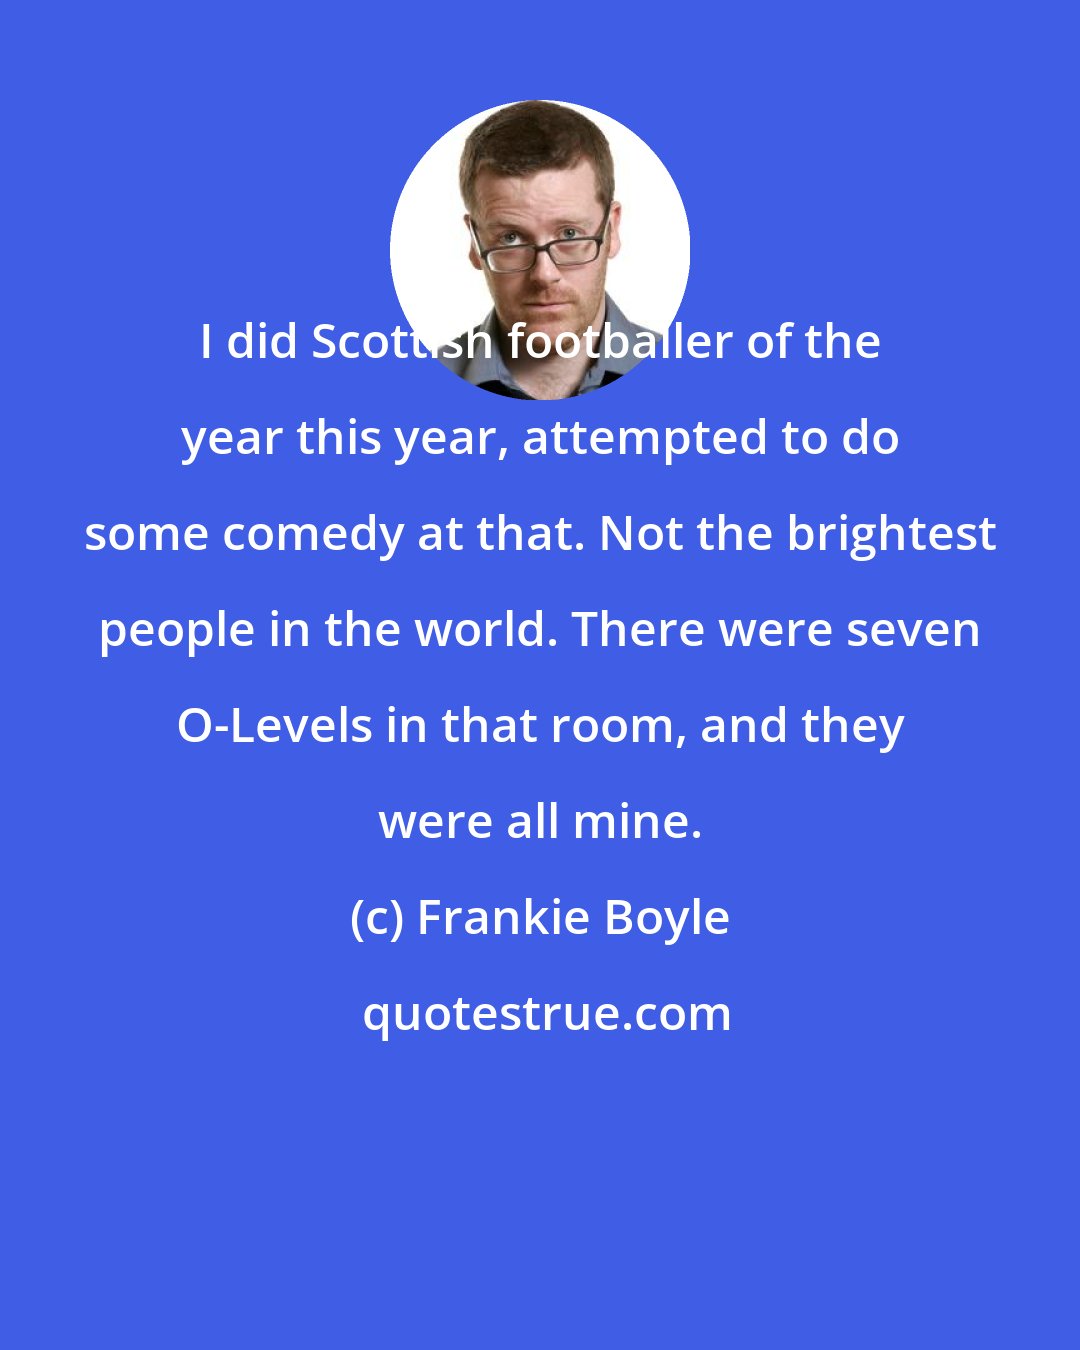 Frankie Boyle: I did Scottish footballer of the year this year, attempted to do some comedy at that. Not the brightest people in the world. There were seven O-Levels in that room, and they were all mine.